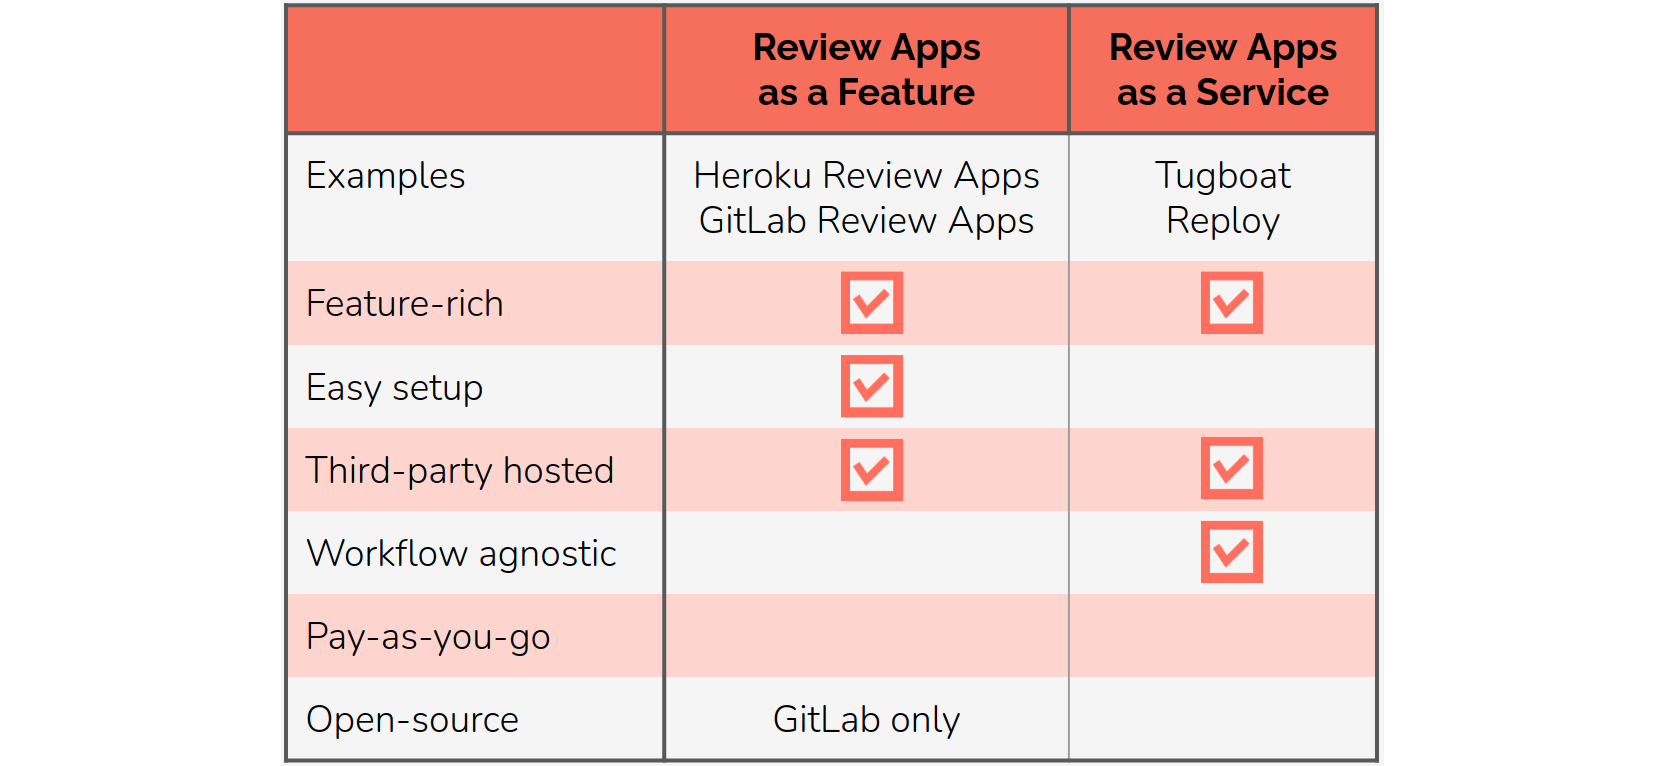 review apps as a feature vs review apps as a service